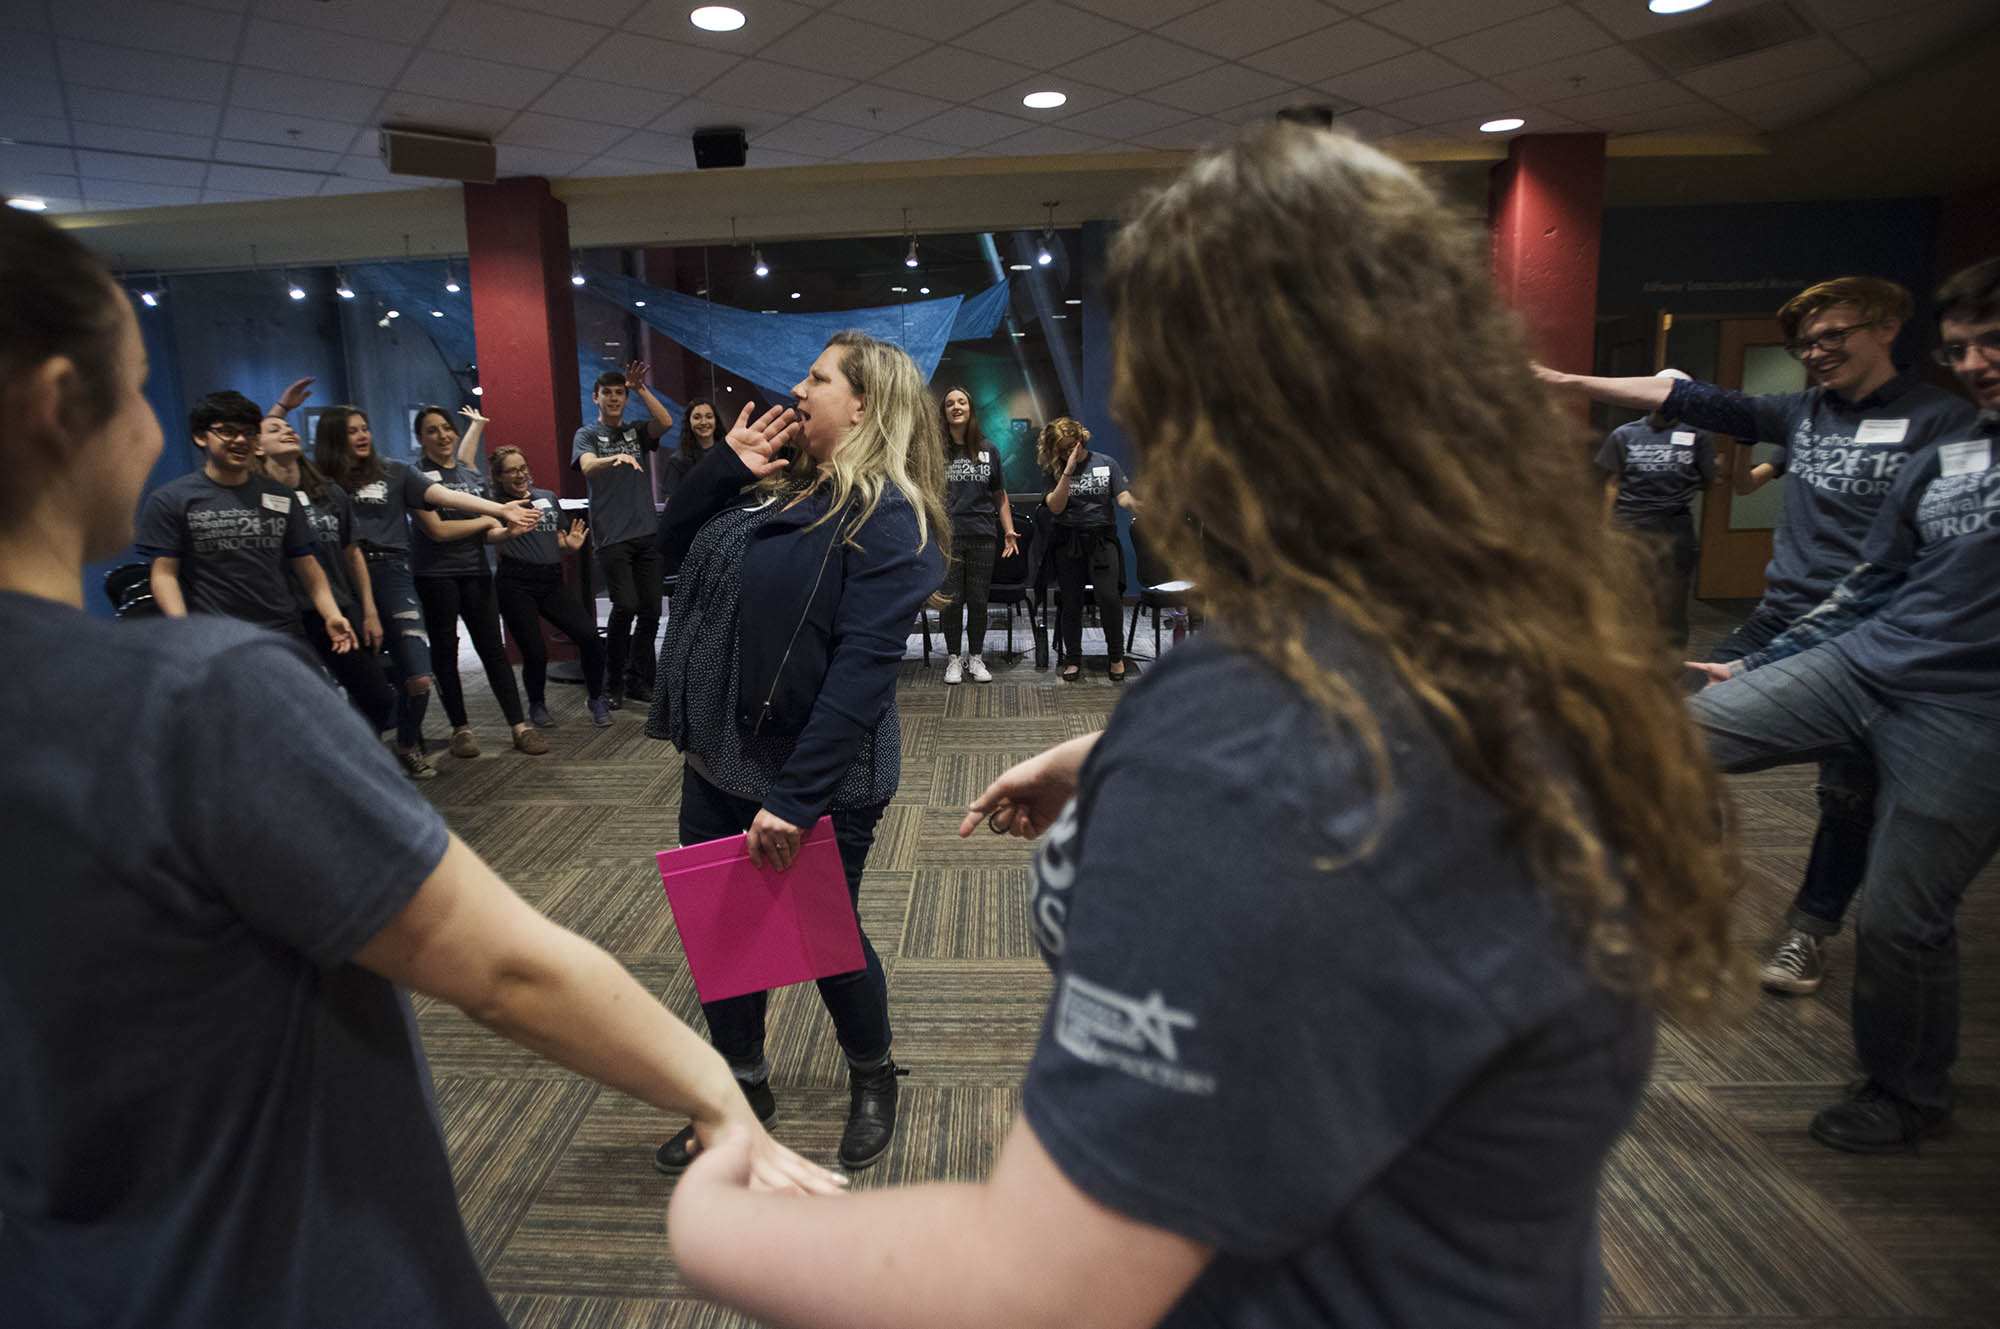 Students from across the Capital Region filled Proctors for the High School Theatre Festival Wednesday. April 11, 2018. Over 160 students from seven schools took part in workshops ranging from improv to Shakespeare, dance to make-up.